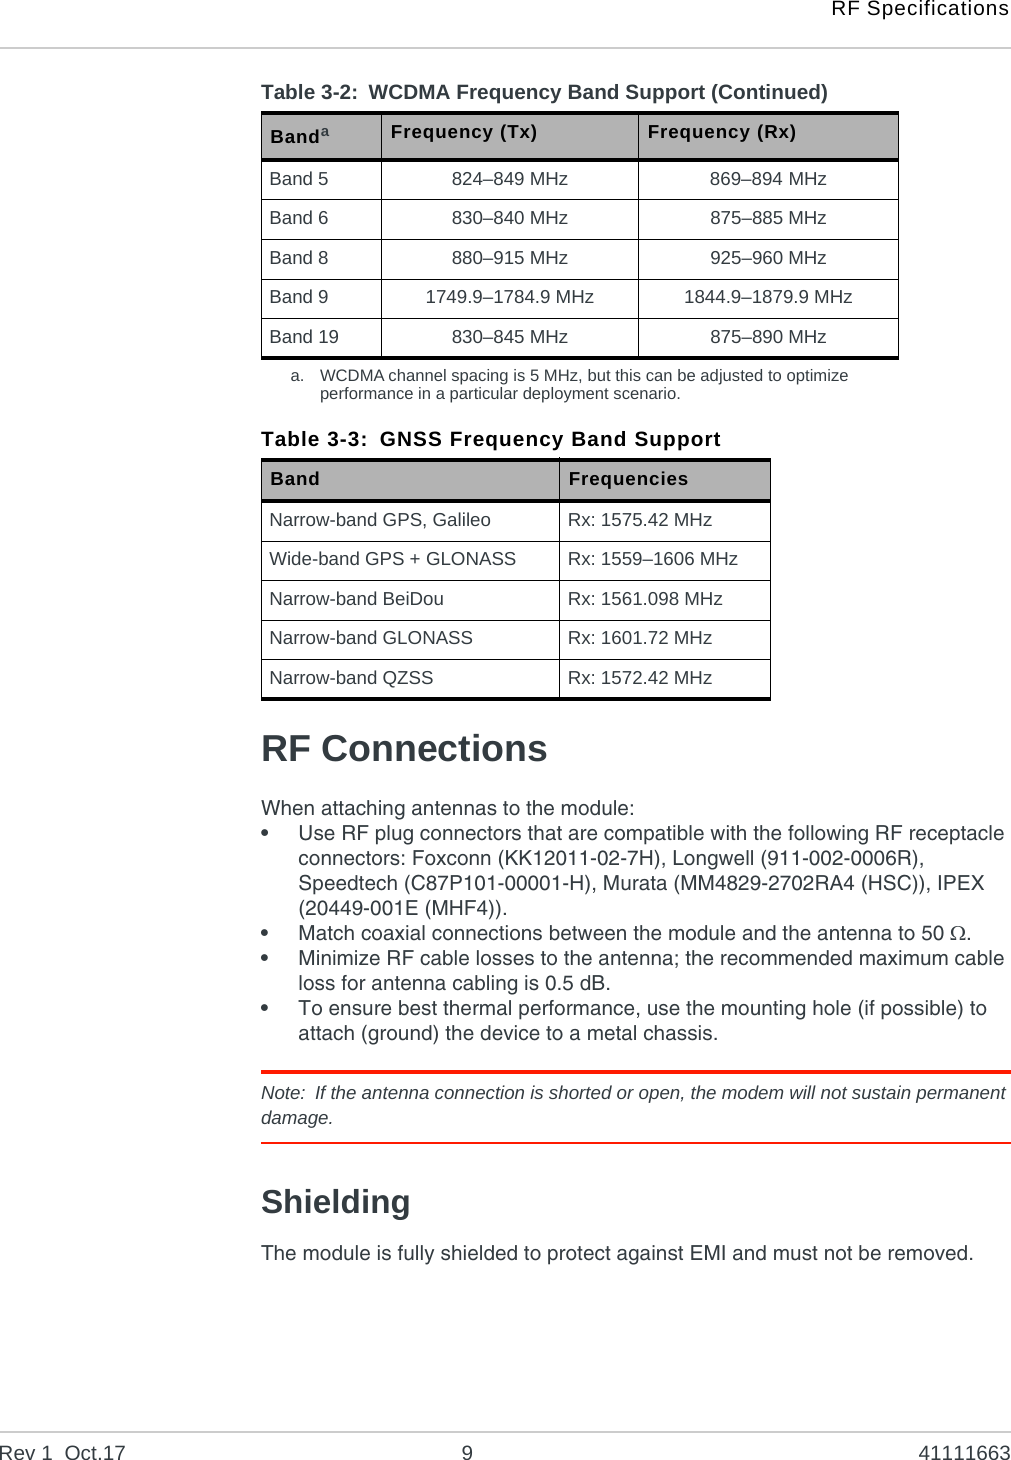 RF SpecificationsRev 1  Oct.17 9 41111663RF ConnectionsWhen attaching antennas to the module:•Use RF plug connectors that are compatible with the following RF receptacle connectors: Foxconn (KK12011-02-7H), Longwell (911-002-0006R), Speedtech (C87P101-00001-H), Murata (MM4829-2702RA4 (HSC)), IPEX (20449-001E (MHF4)).•Match coaxial connections between the module and the antenna to 50 .•Minimize RF cable losses to the antenna; the recommended maximum cable loss for antenna cabling is 0.5 dB.•To ensure best thermal performance, use the mounting hole (if possible) to attach (ground) the device to a metal chassis.Note: If the antenna connection is shorted or open, the modem will not sustain permanent damage.ShieldingThe module is fully shielded to protect against EMI and must not be removed.Band 5 824–849 MHz 869–894 MHzBand 6 830–840 MHz 875–885 MHzBand 8 880–915 MHz 925–960 MHzBand 9 1749.9–1784.9 MHz 1844.9–1879.9 MHzBand 19 830–845 MHz 875–890 MHza. WCDMA channel spacing is 5 MHz, but this can be adjusted to optimize performance in a particular deployment scenario.Table 3-3: GNSS Frequency Band SupportBand FrequenciesNarrow-band GPS, Galileo Rx: 1575.42 MHzWide-band GPS + GLONASS Rx: 1559–1606 MHzNarrow-band BeiDou Rx: 1561.098 MHzNarrow-band GLONASS Rx: 1601.72 MHzNarrow-band QZSS Rx: 1572.42 MHzTable 3-2: WCDMA Frequency Band Support (Continued)BandaFrequency (Tx) Frequency (Rx)